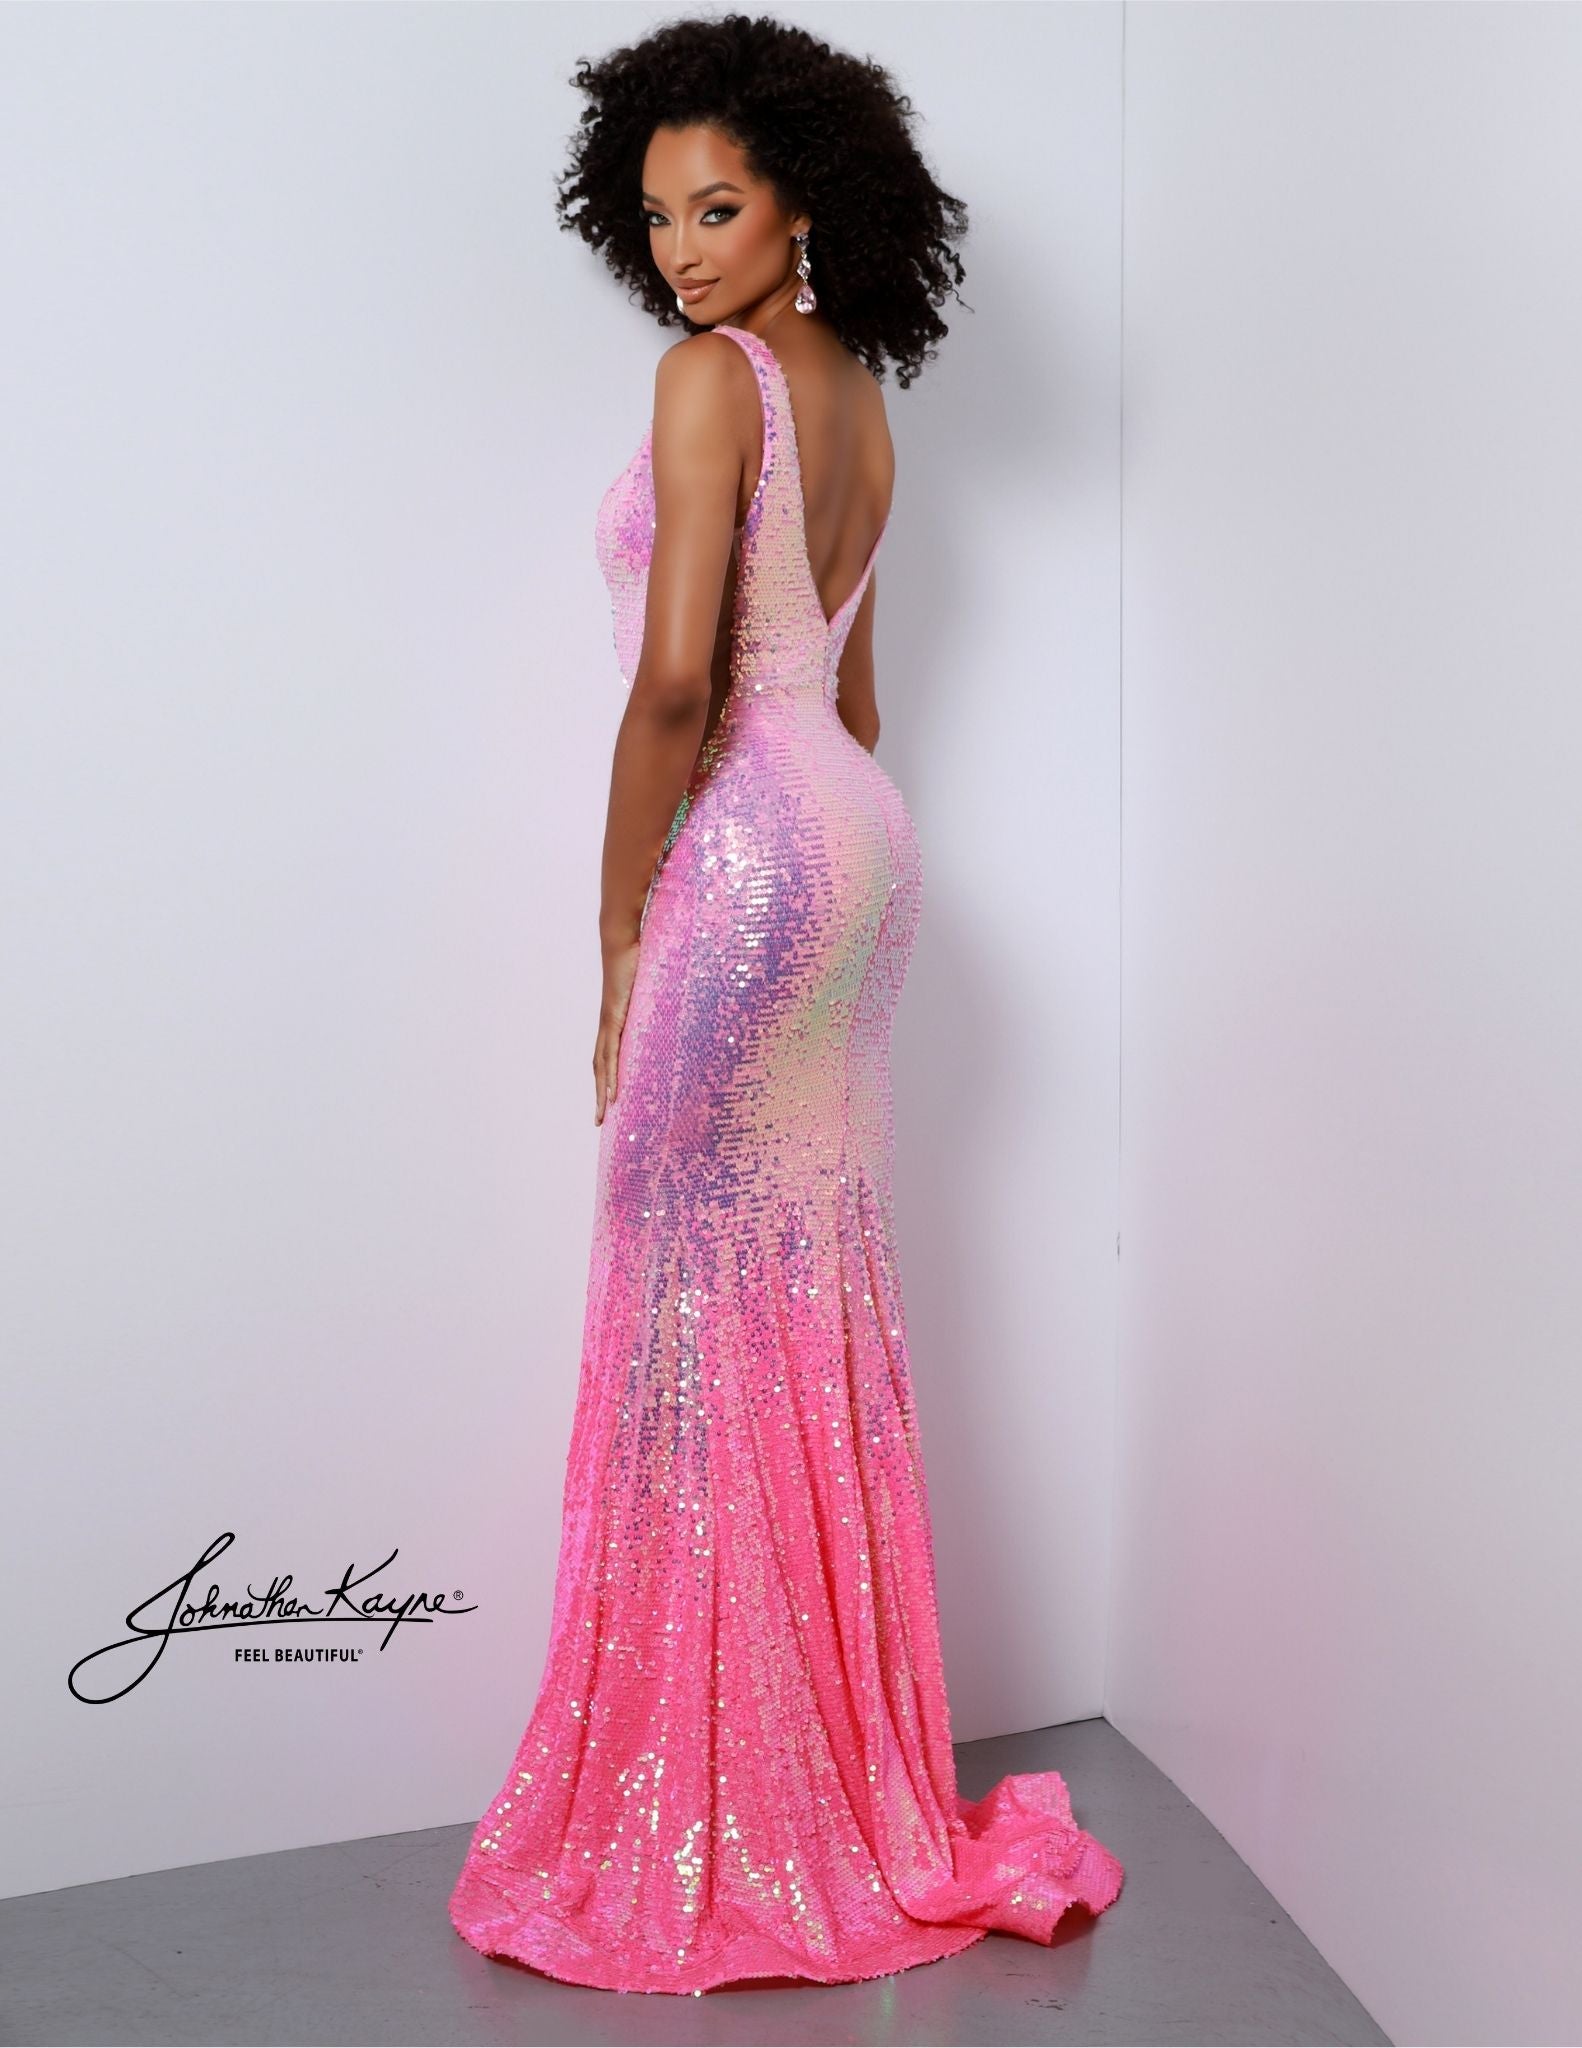 Be the belle of the ball wearing this Johnathan Kayne 2829 Long Prom Dress. It features a V neck and high slit, embellished with ombre sequins for extra sparkle. This formal pageant gown is perfect for your grand entrance. Sizzle and stun the room! Our Ombre Sequin Mesh gown featuring detachable feathered rhinestone chains and a slit will leave everyone talking at your next event!